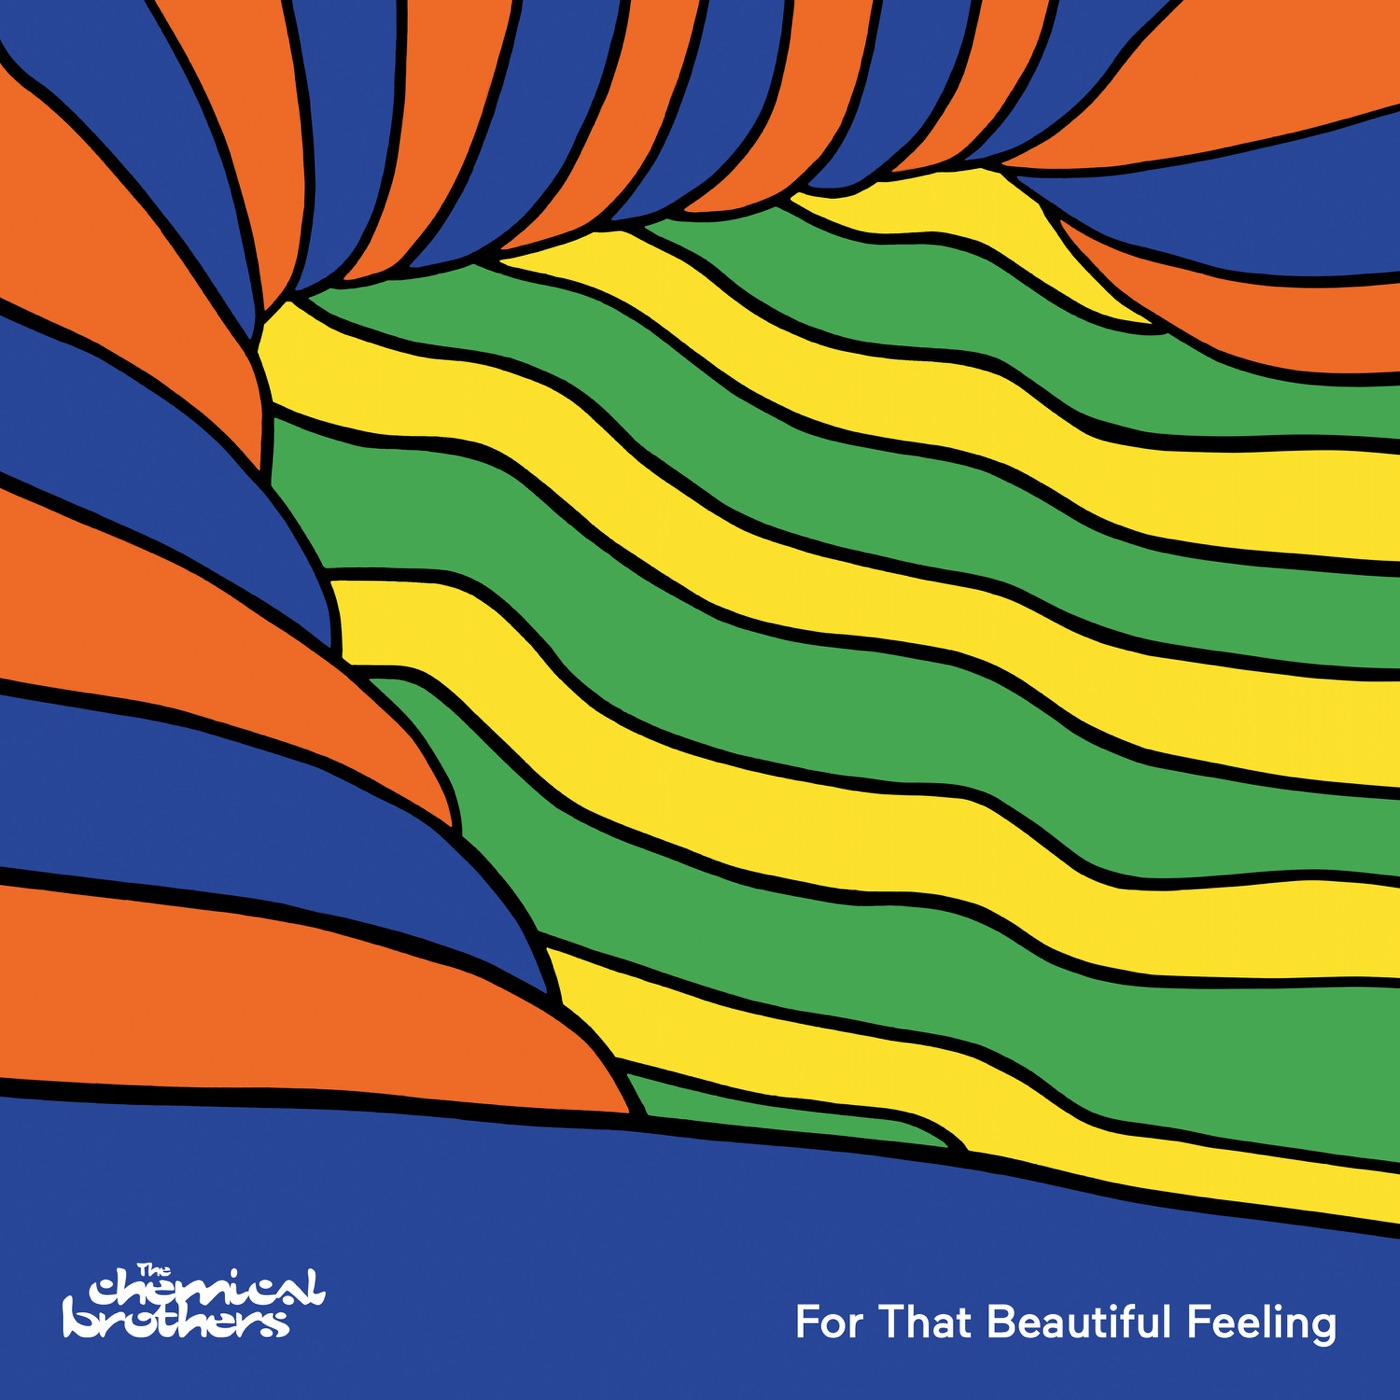 For That Beautiful Feeling by The Chemical Brothers, Halo Maud, For That Beautiful Feeling